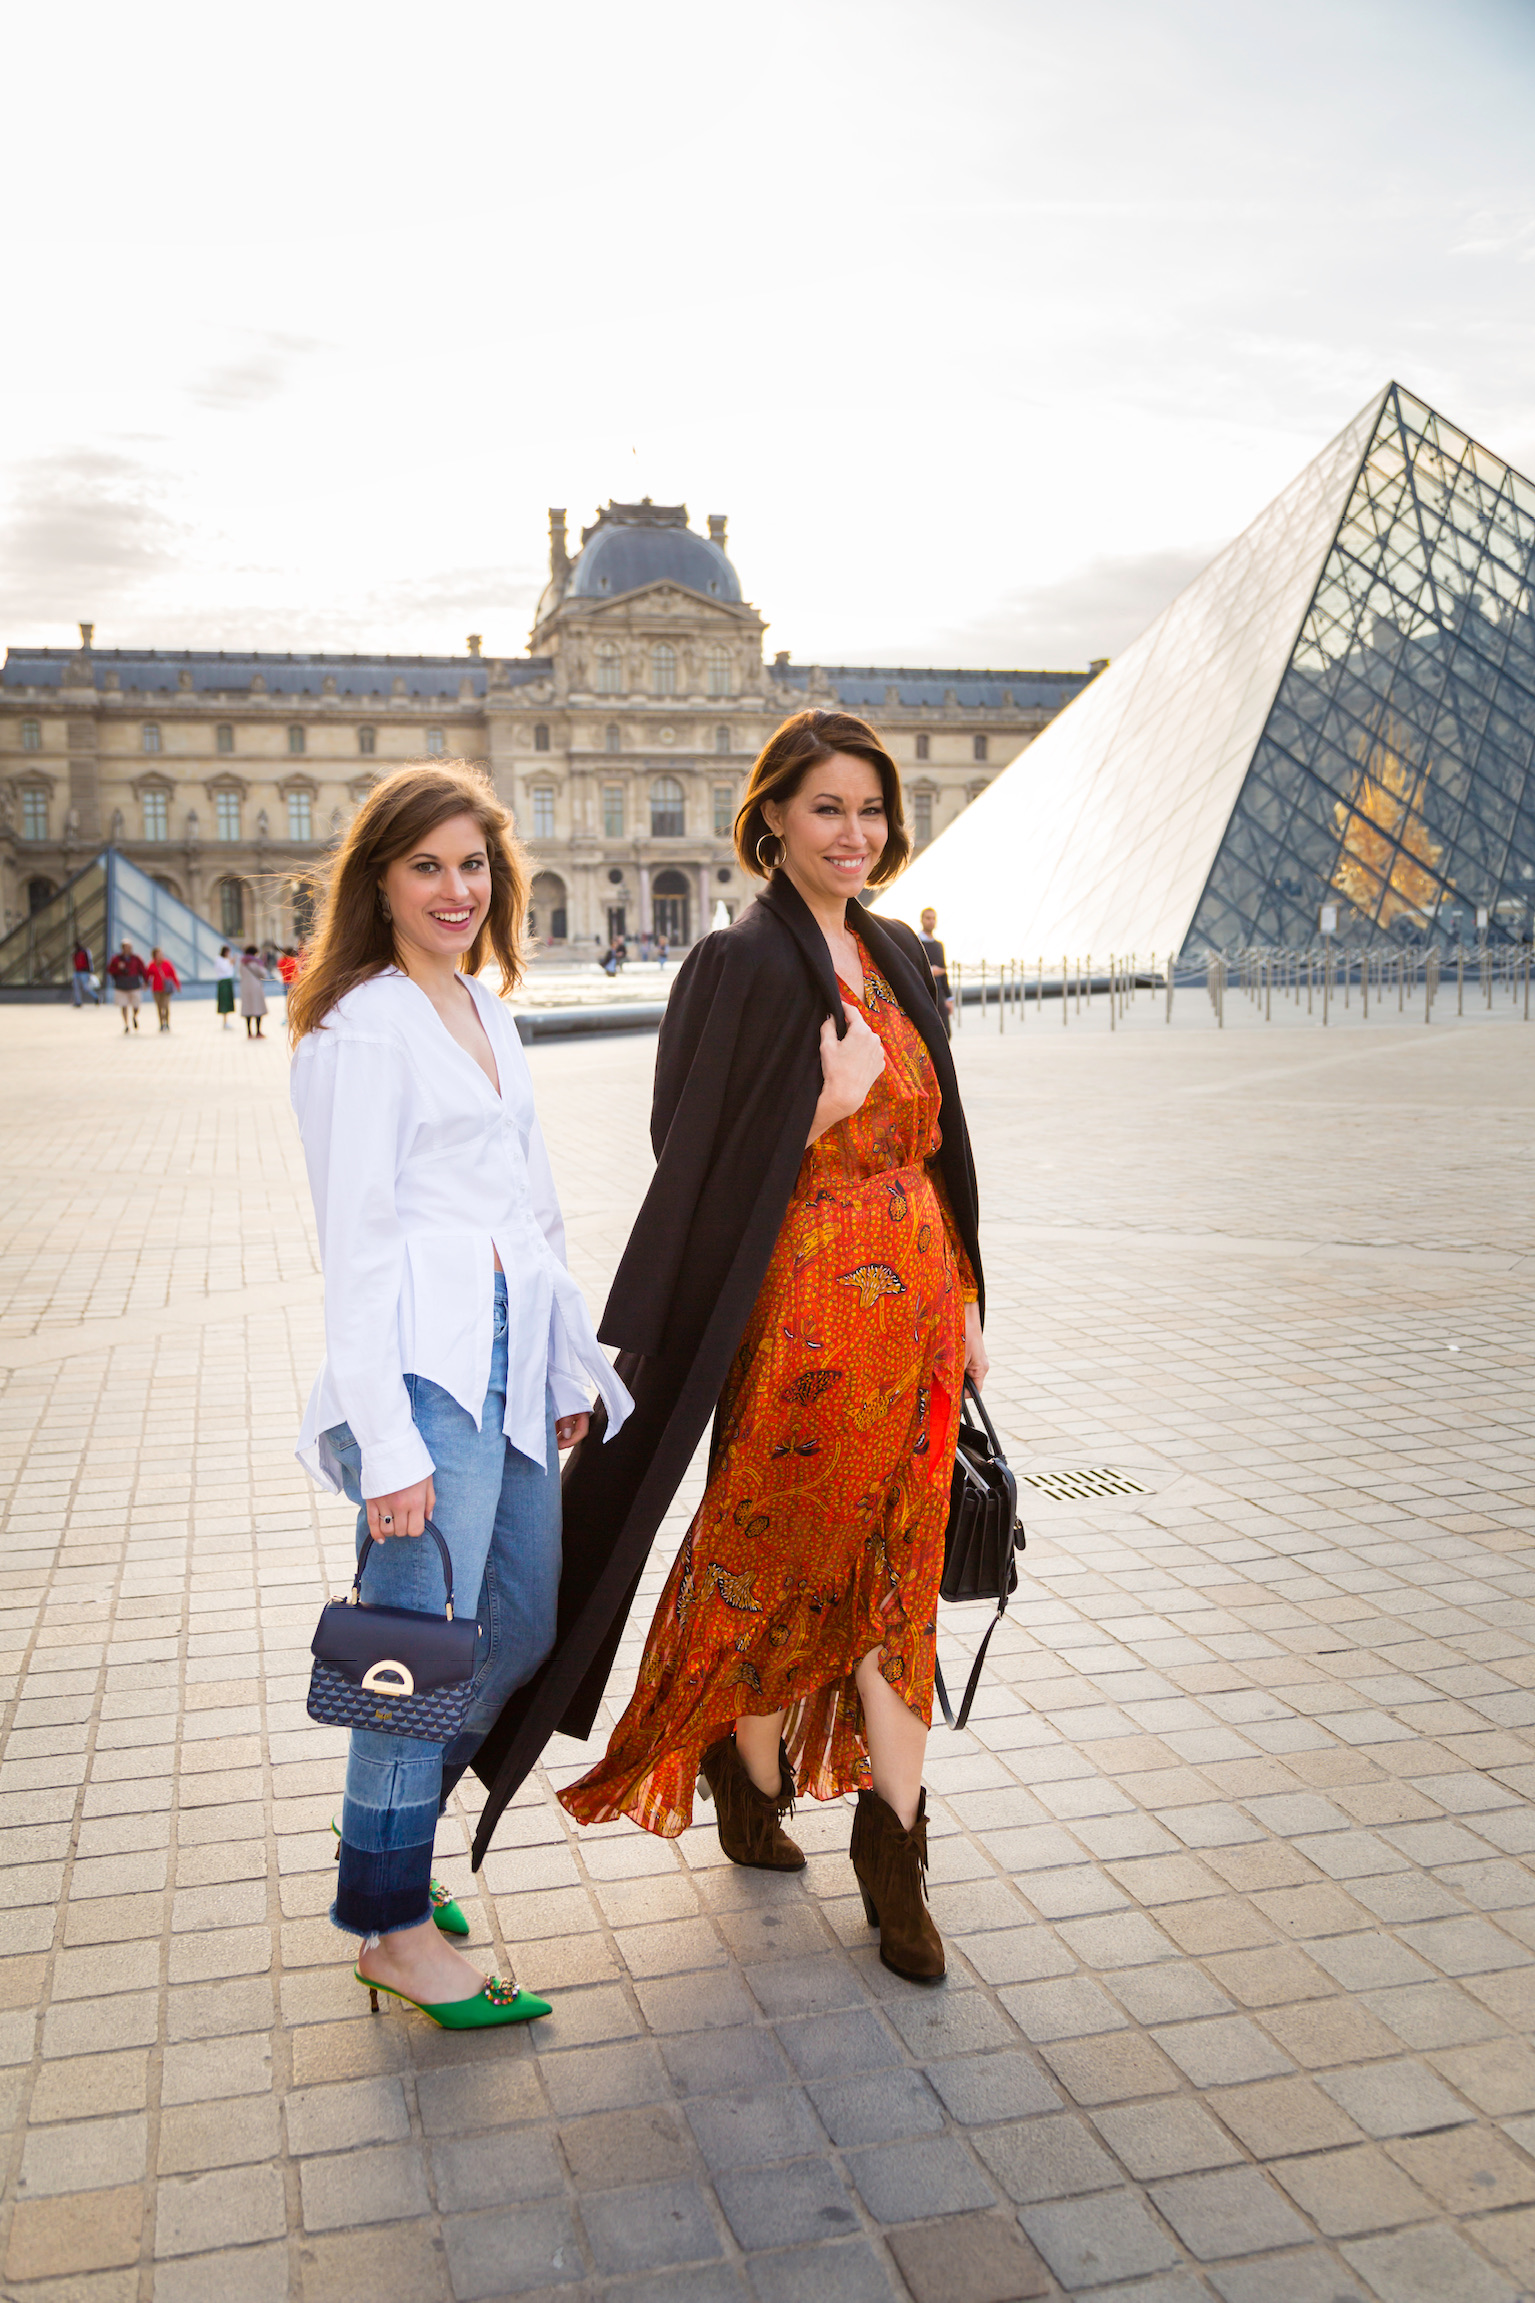 Two women walking by The Louvre: one wearing a white top, jeans and green kitten heels, the other is wearing a black blazer and a printed dress with brown cowboy boots